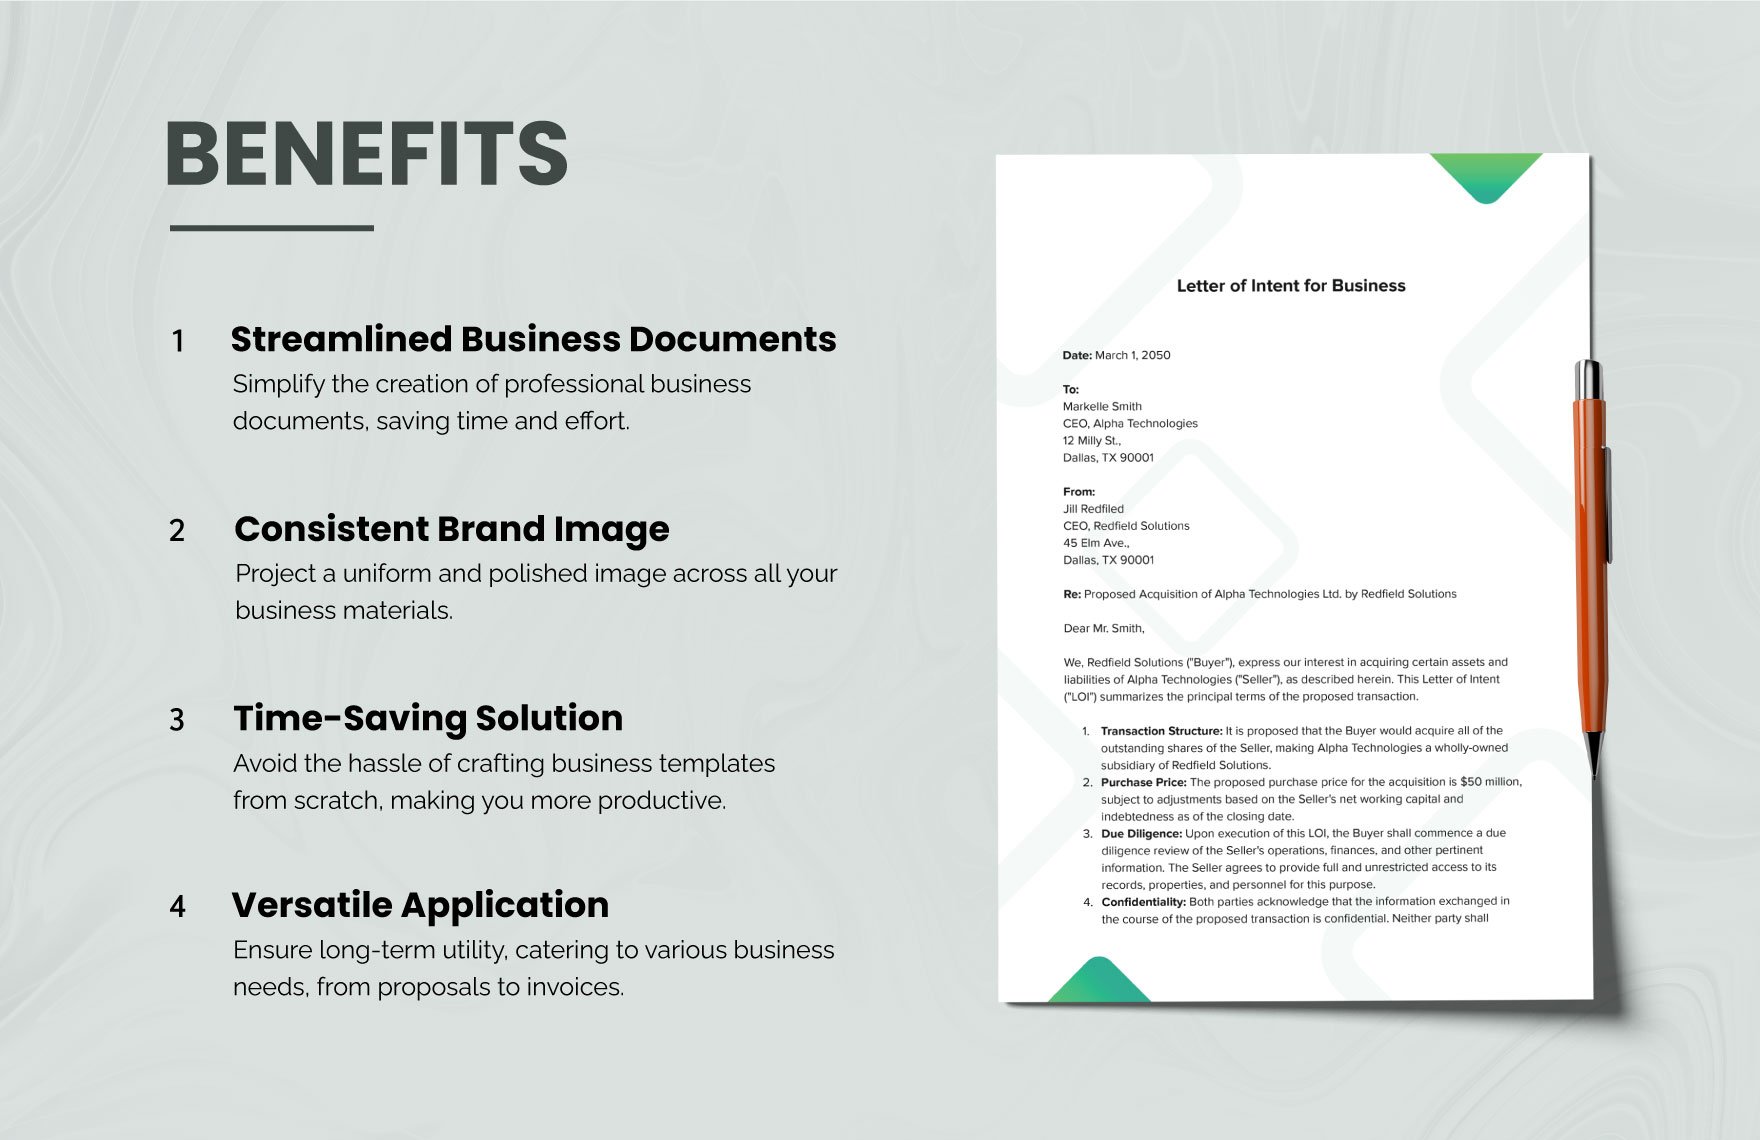 Letter of Intent for Business Template